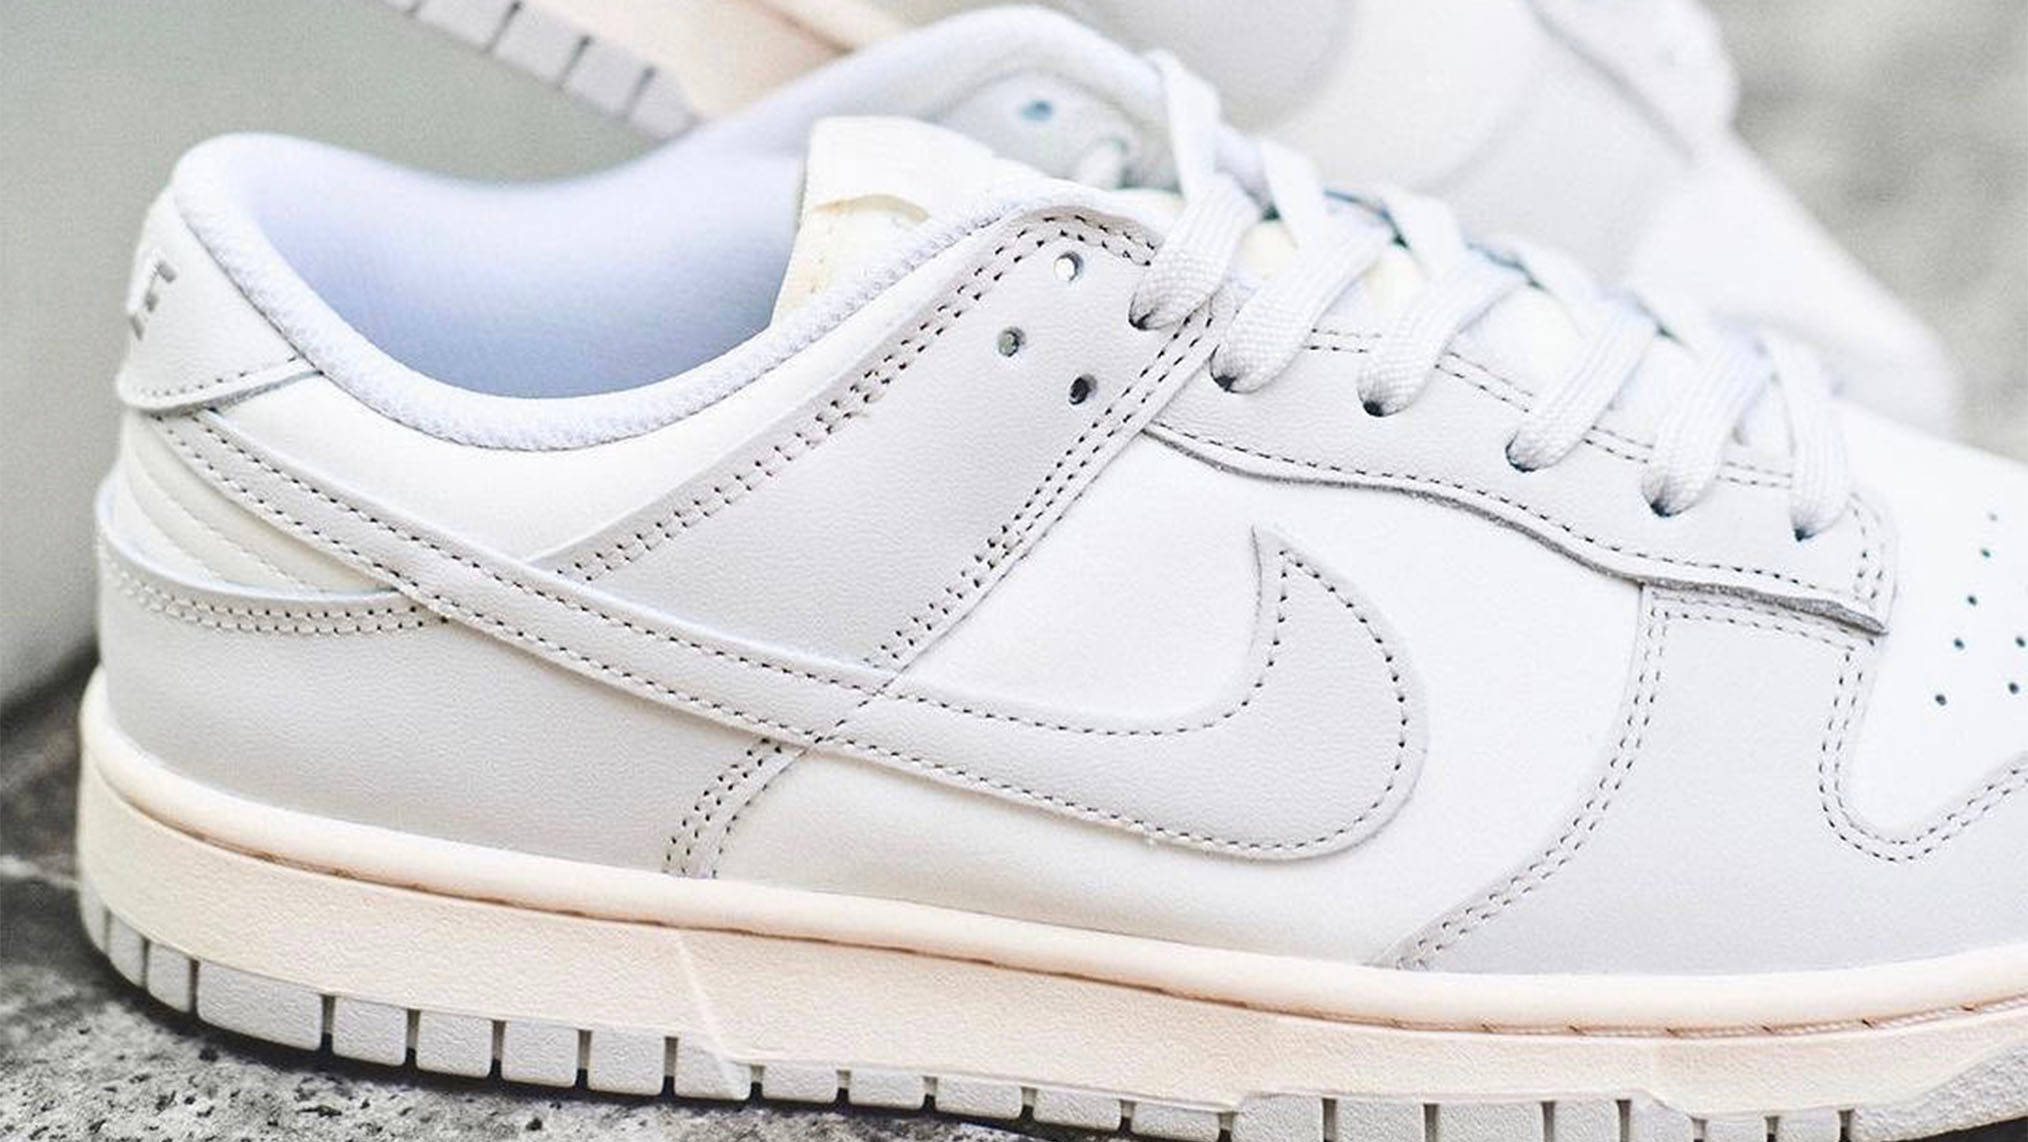 The Nike Dunk Low Looks Ultra-Clean in 'Light Bone' | The Sole Supplier